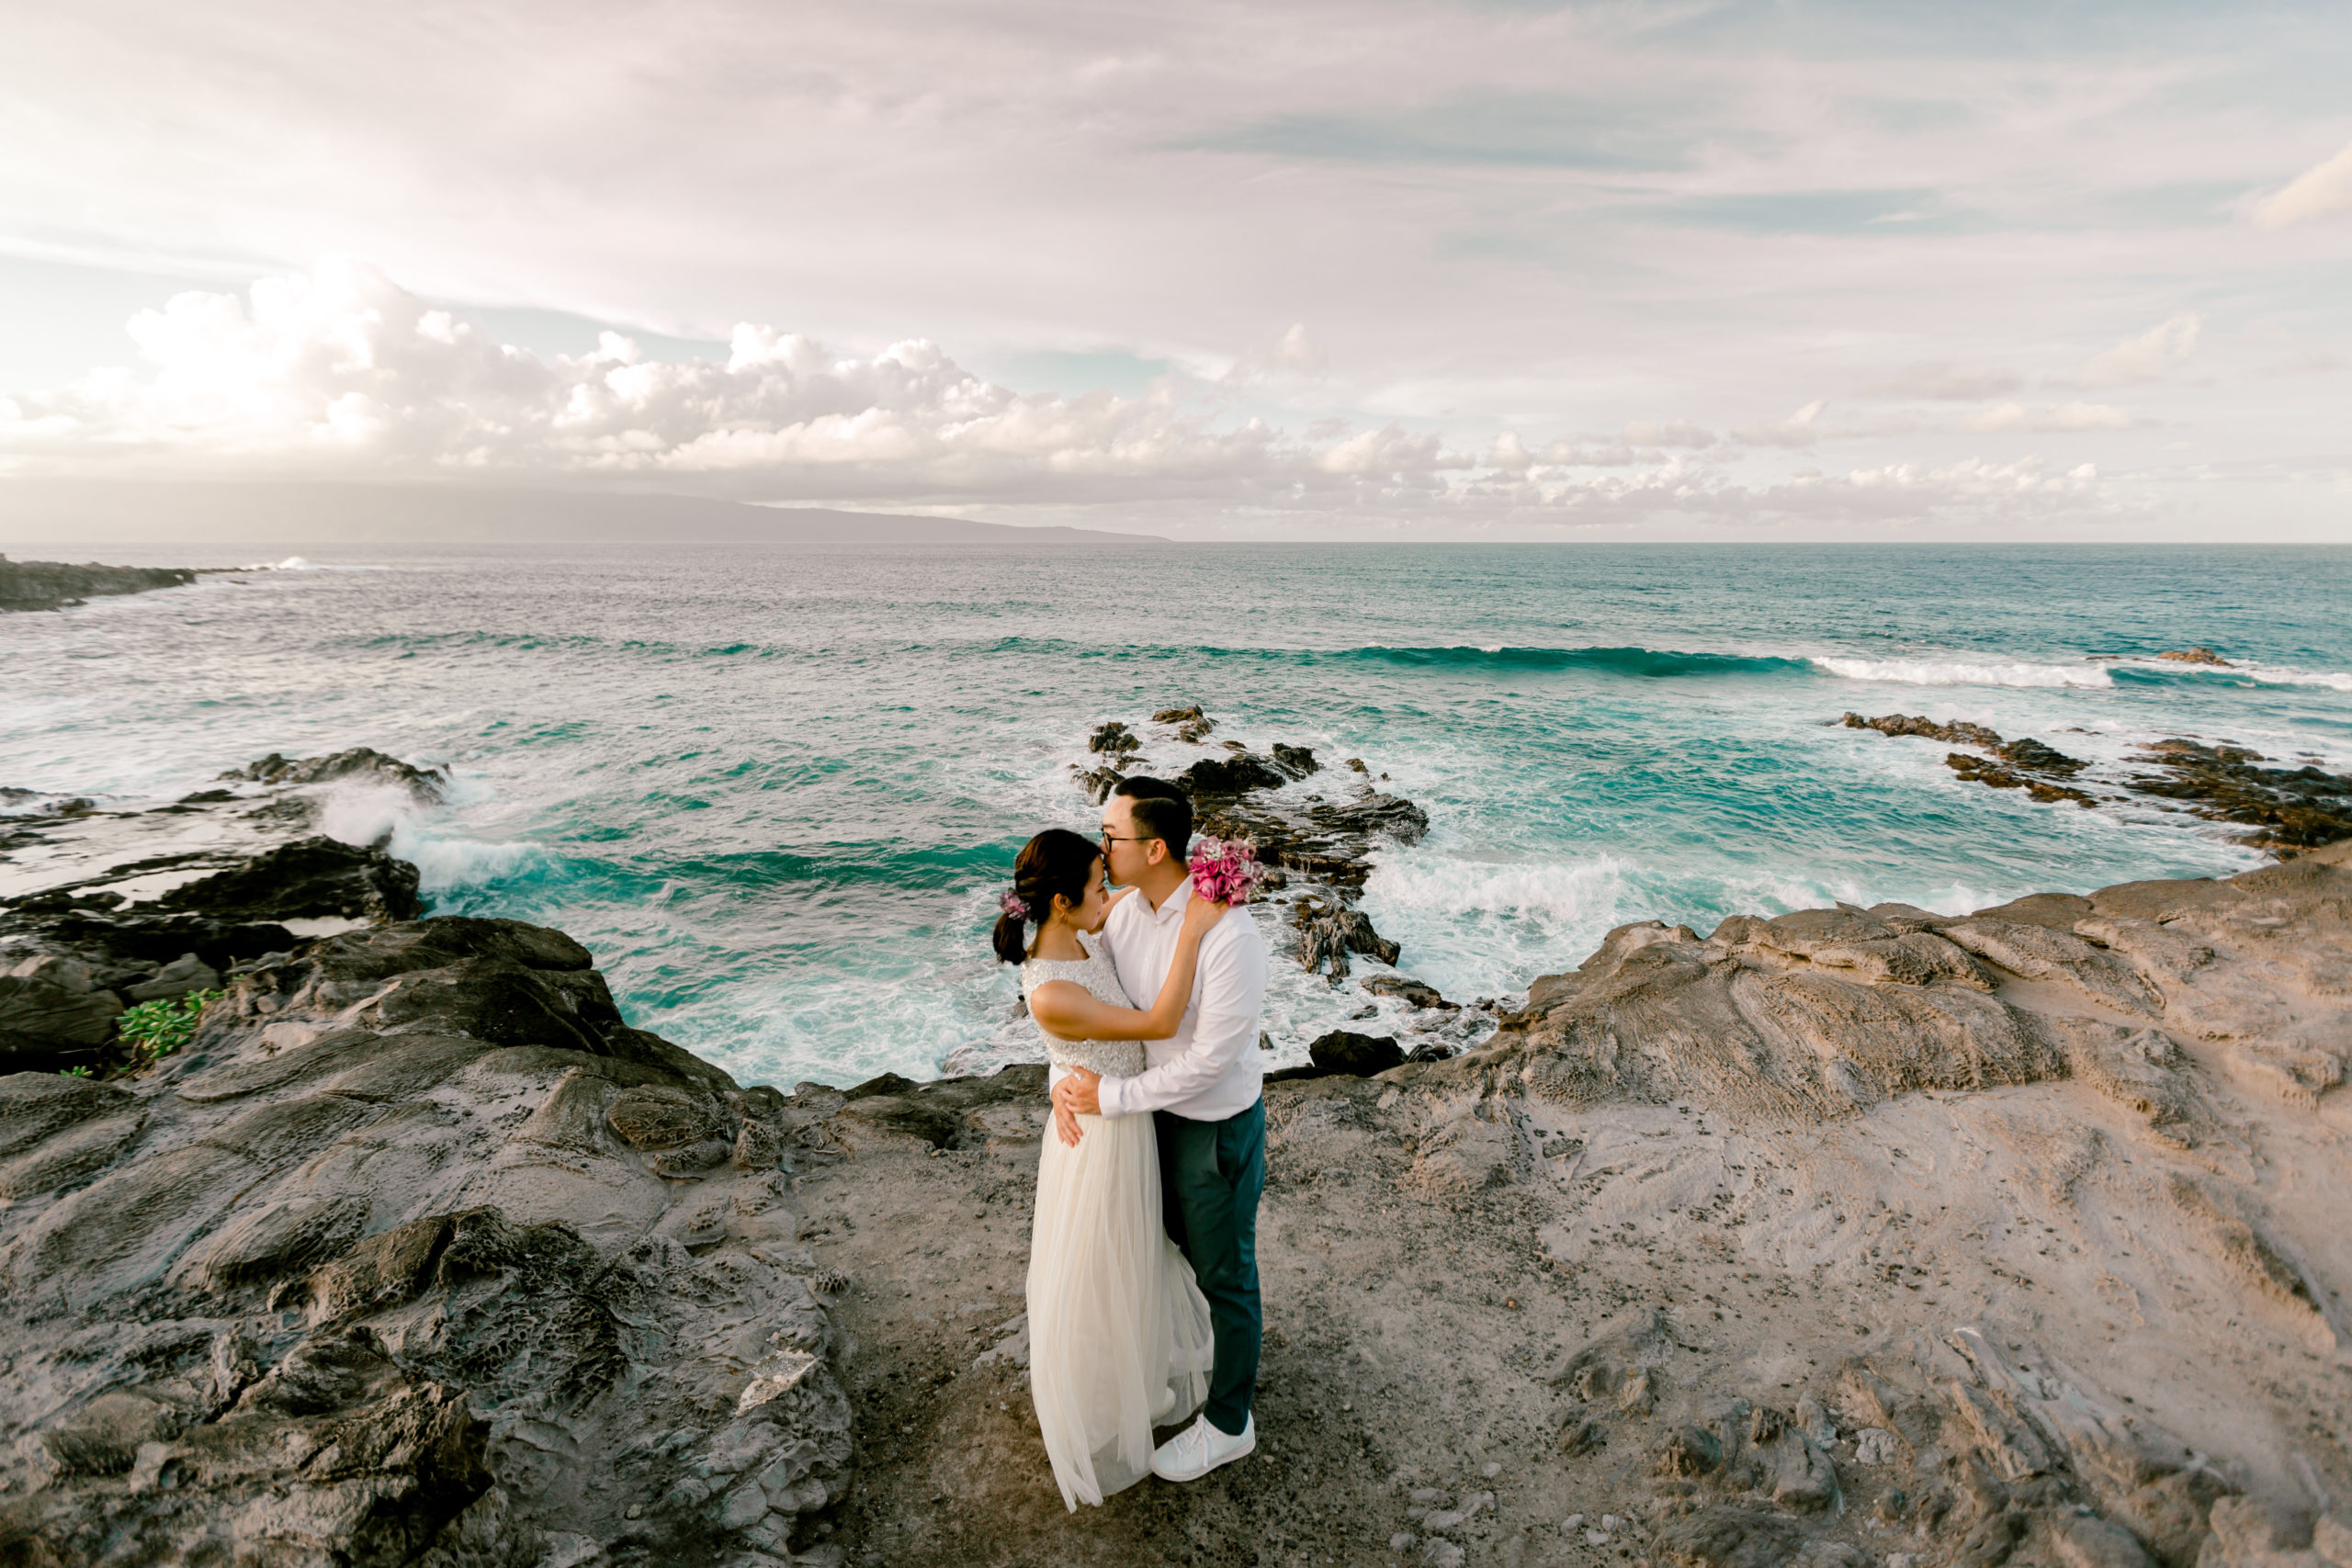 Jenny Vargas Photography Team Associate Amber photographs the Newlywed Couple's Photography Session at Honolua Forest and Ironwoods Beach